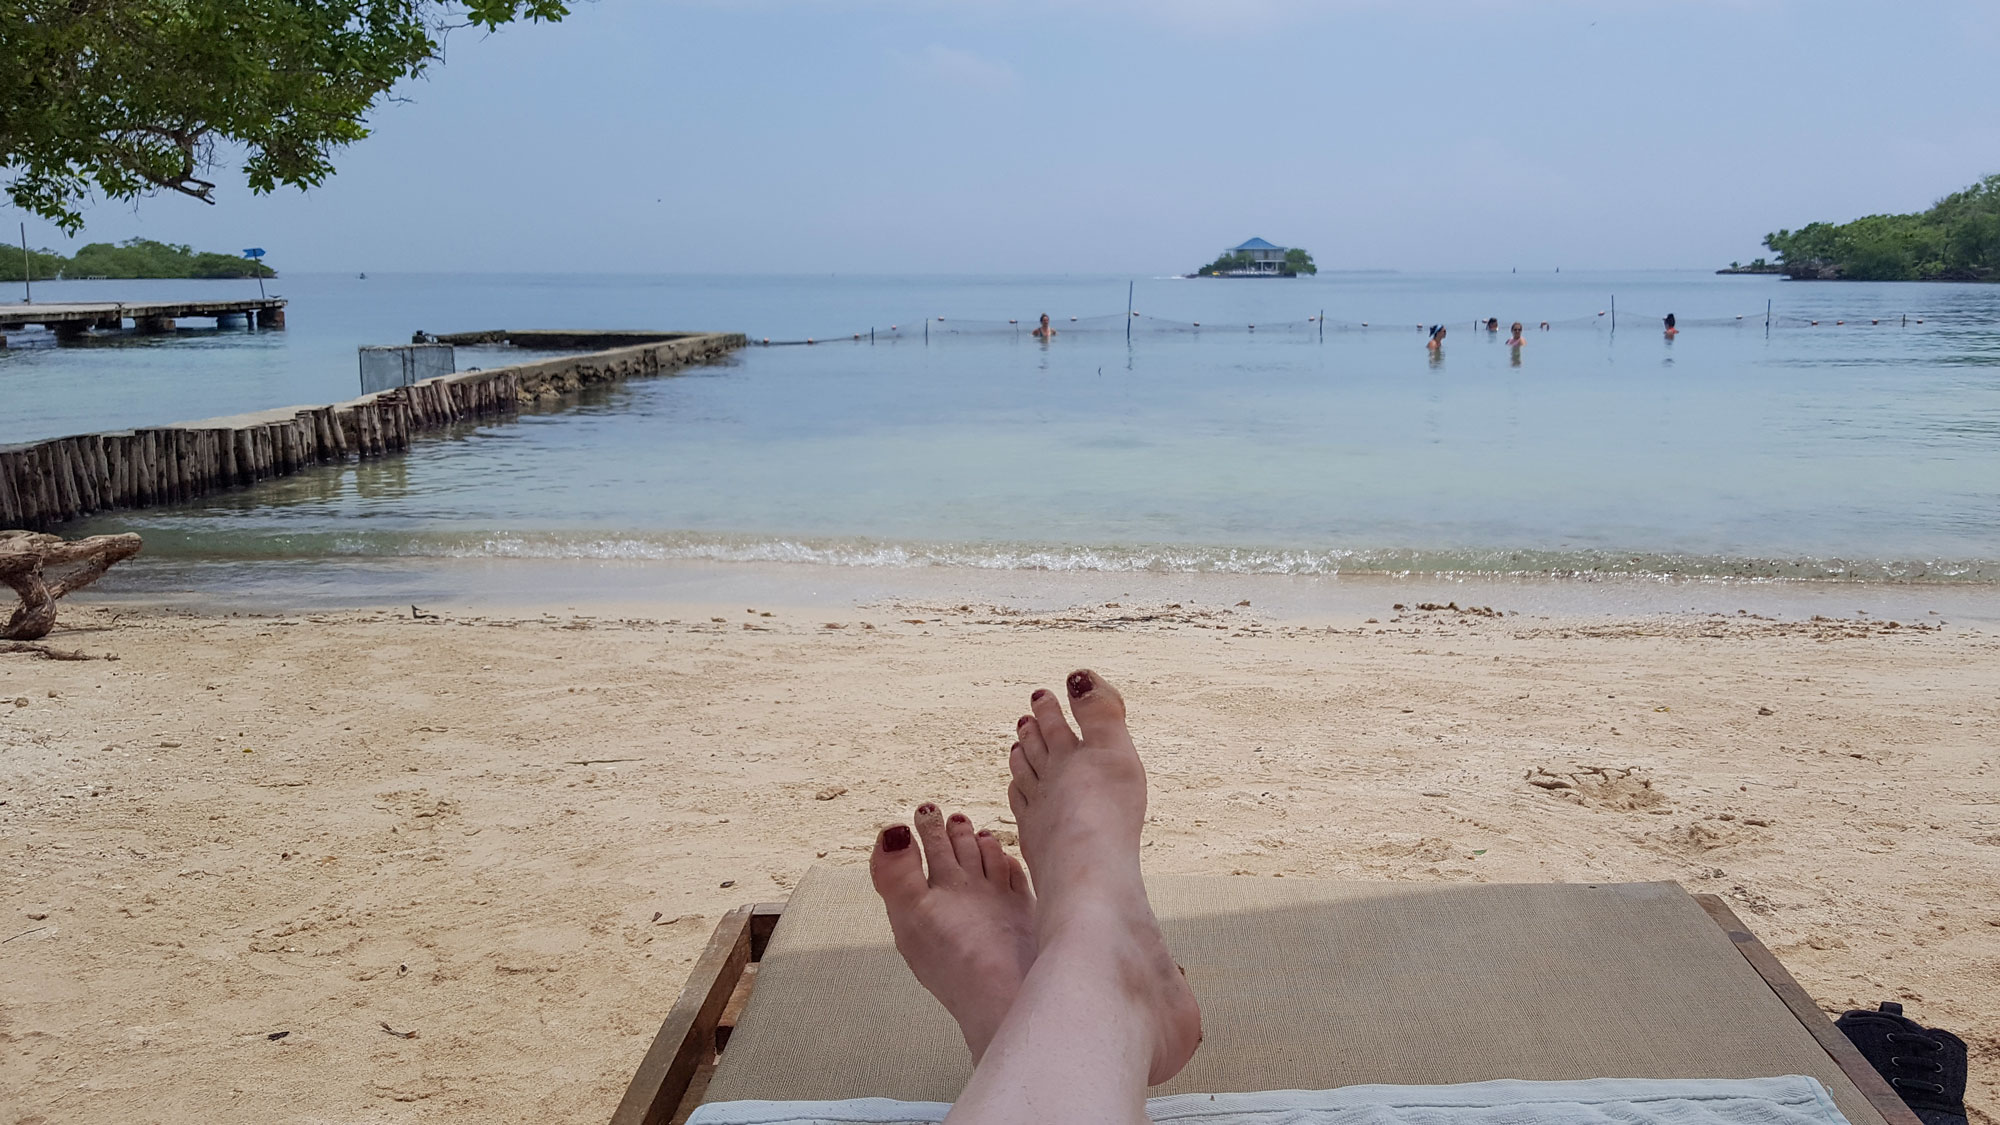 Krystal's feet are in the foreground on the beach chair, and the water is in the background